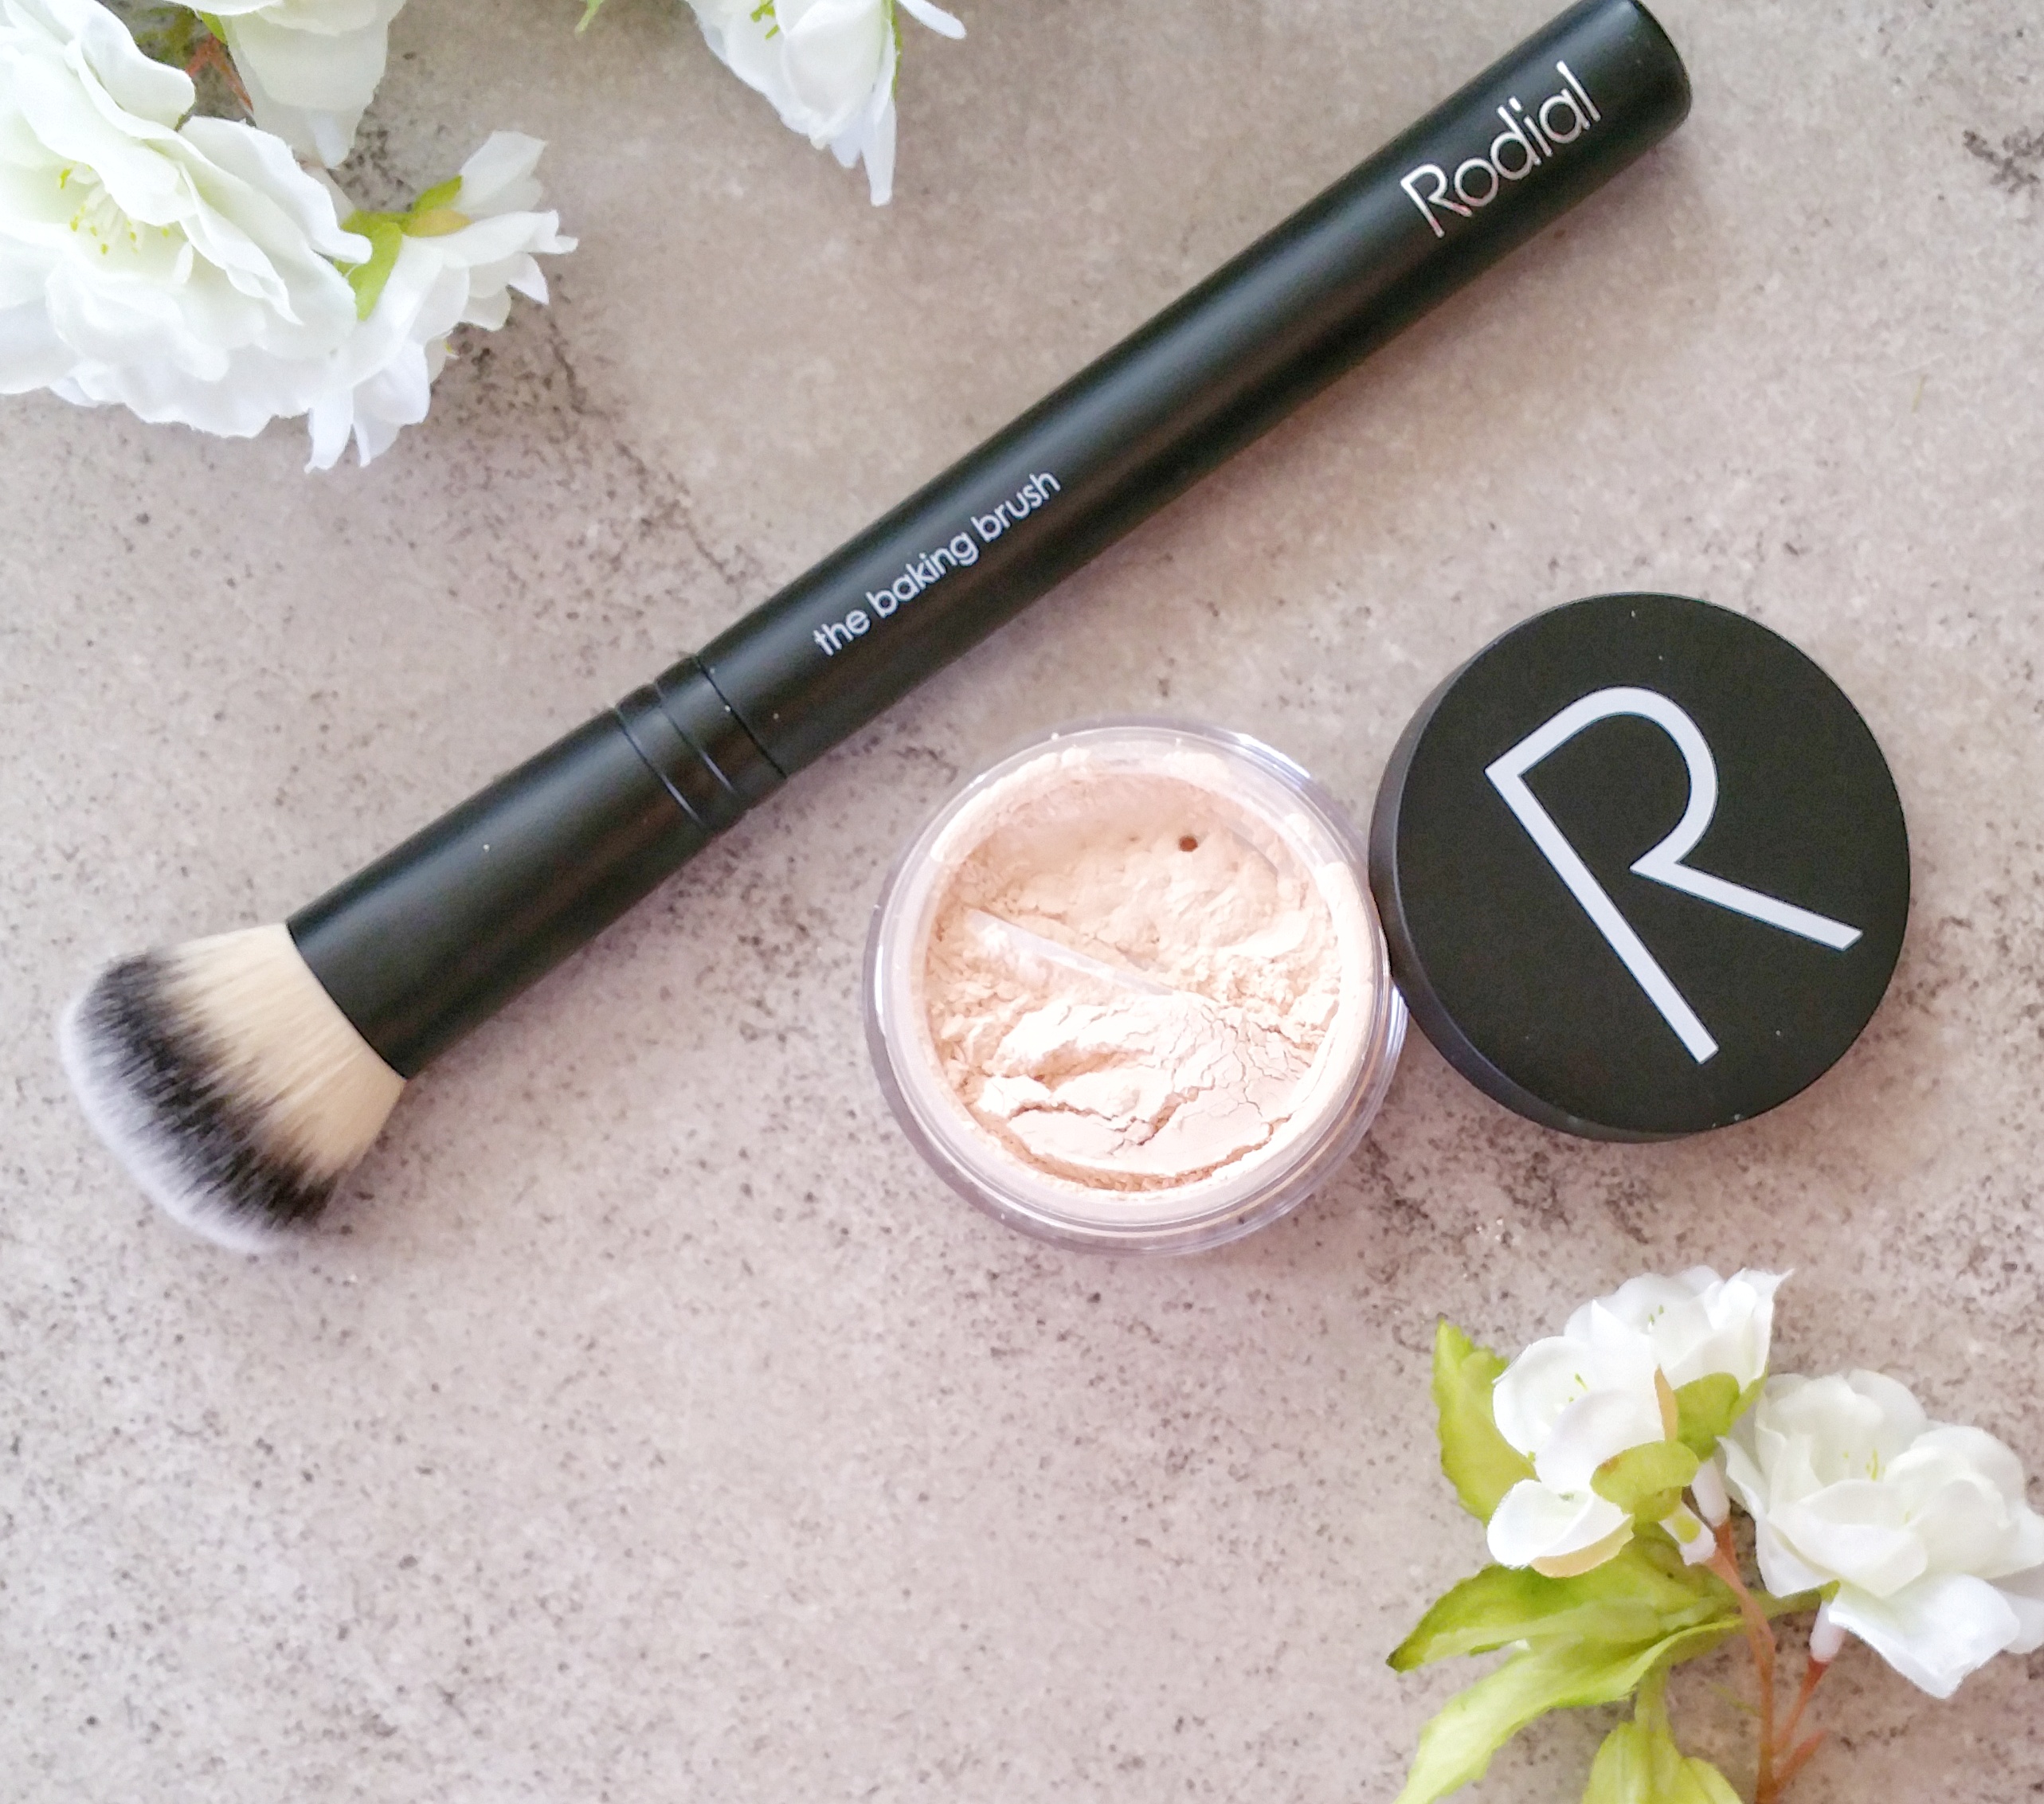 Rodial, skin care, skincare, beauty, makeup, skin, face, anti-aging, beautiful, collectively, Nip + Fab, product review, review, 